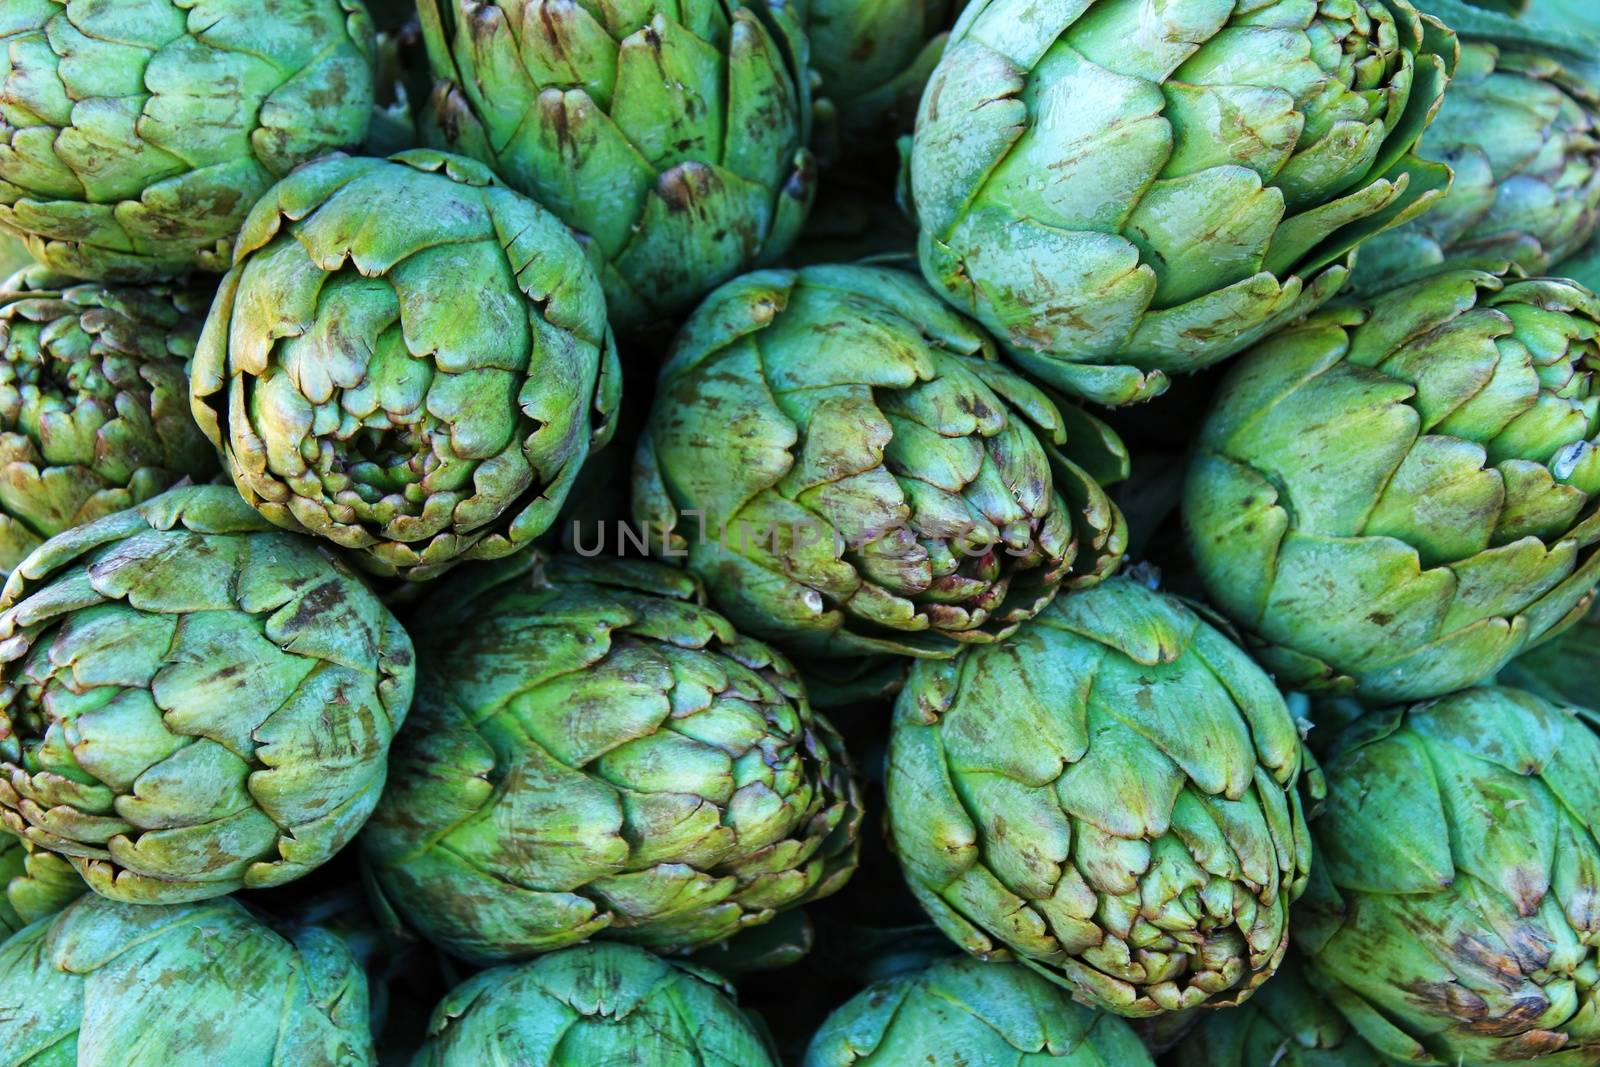 Artichokes for sale at a market stall by soniabonet